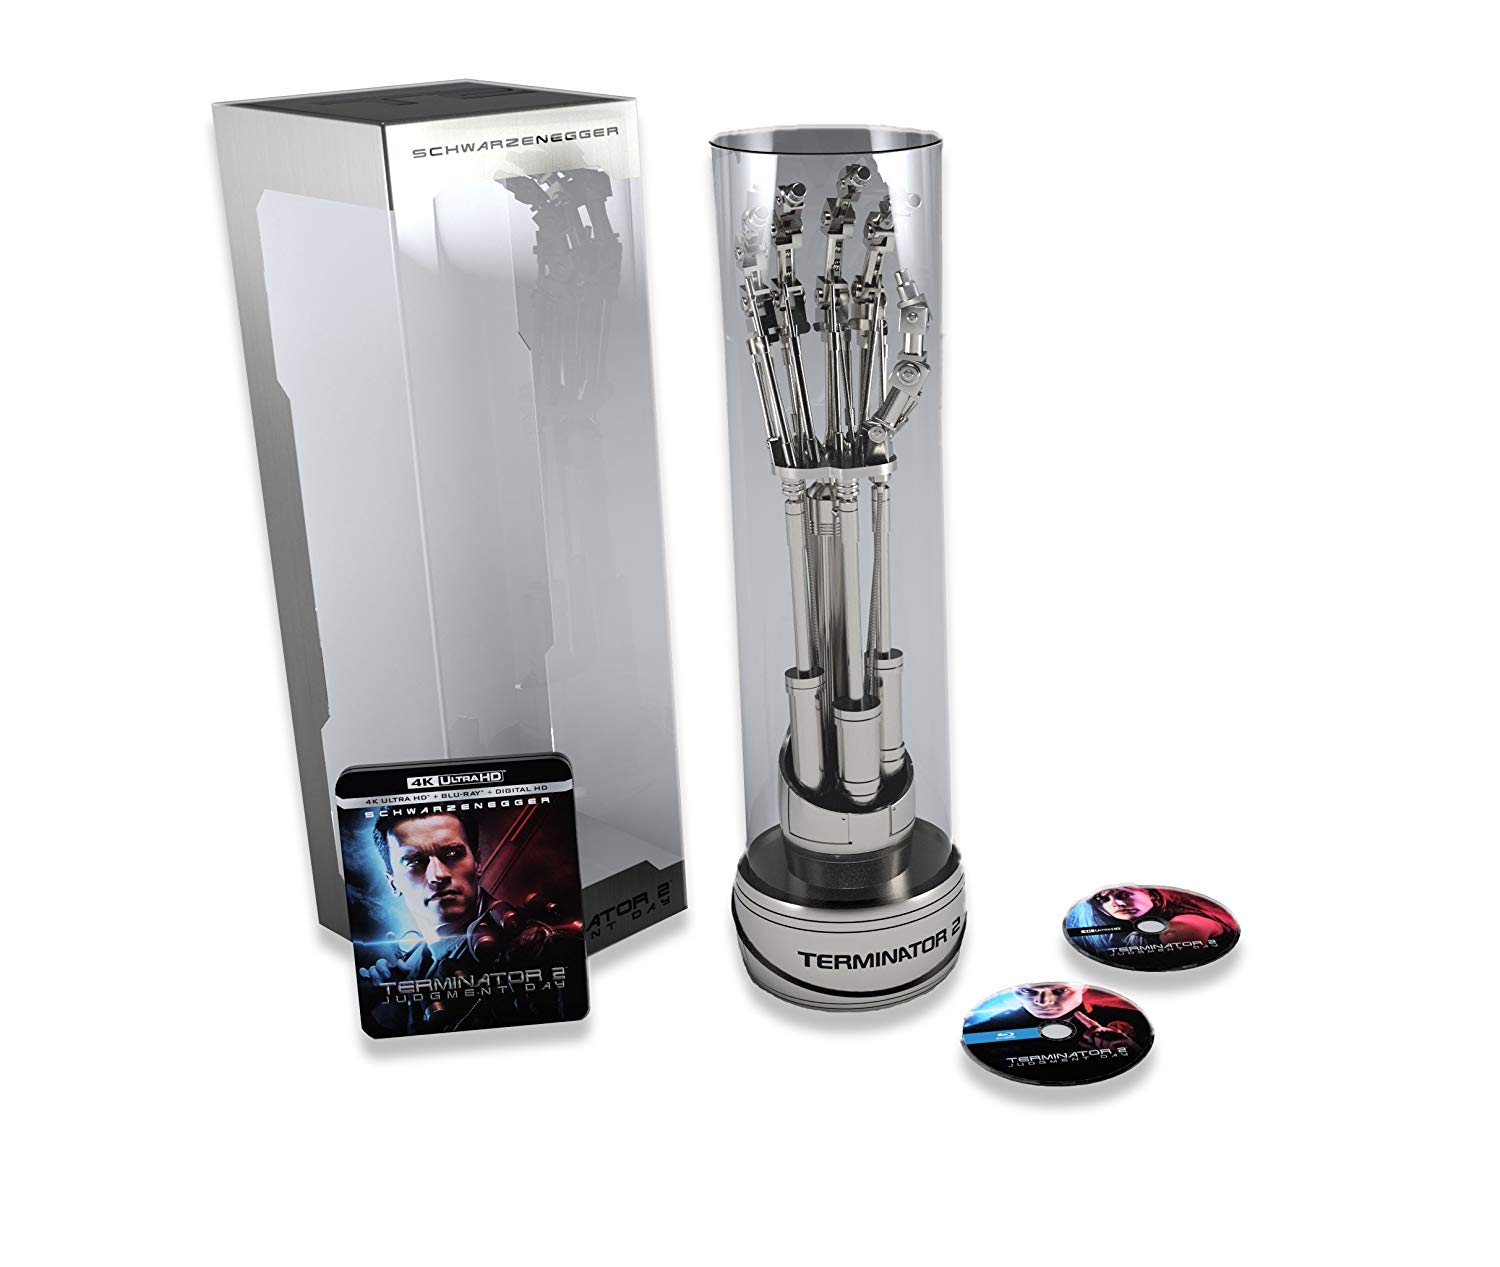 Terminator 2: Judgment Day Endoarm 4K Ultra HD Collector's Edition